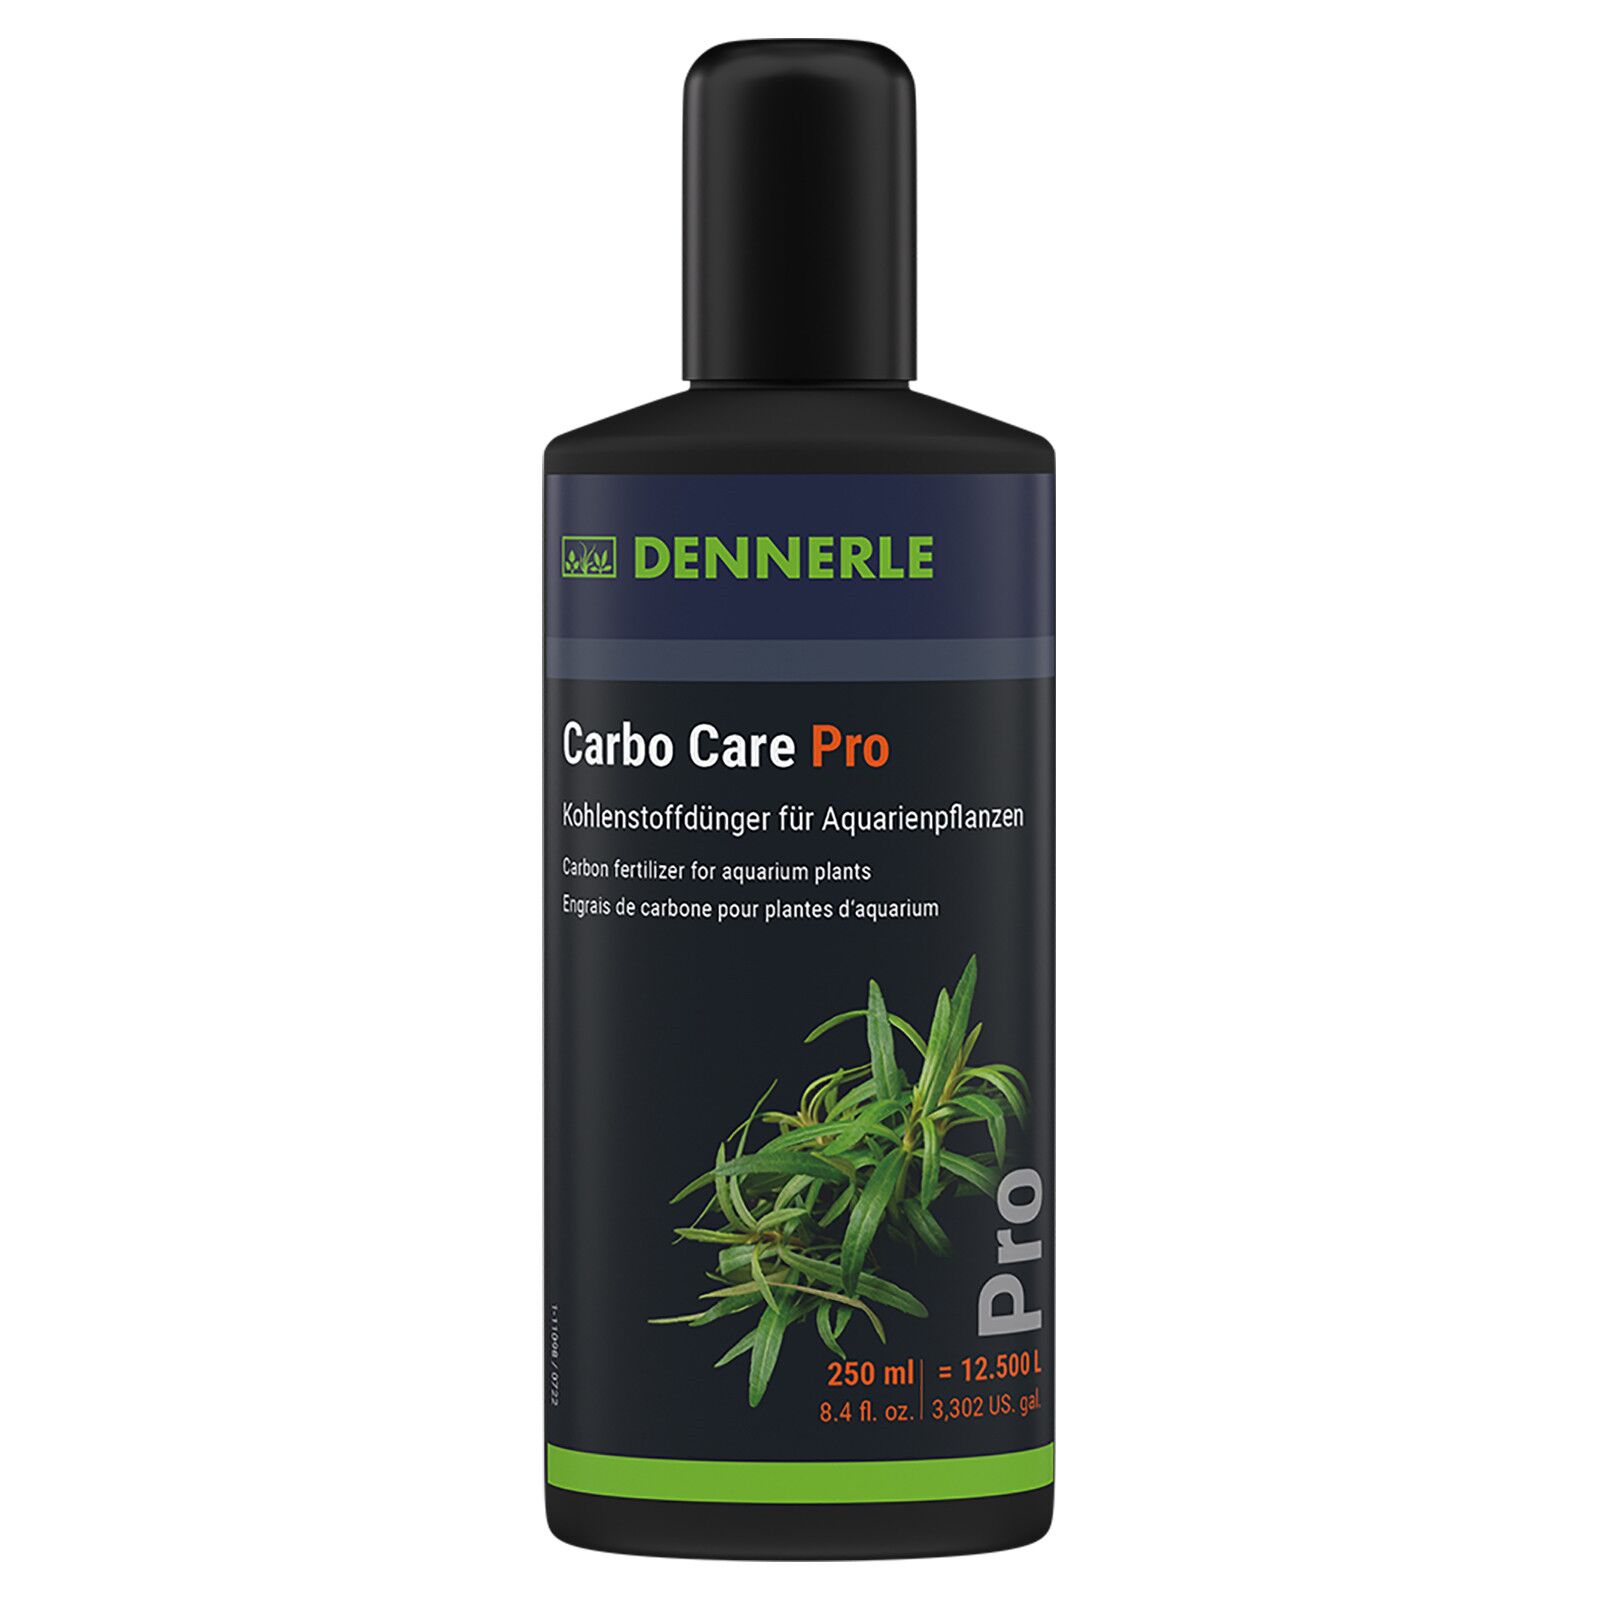 Dennerle - Carbo Care Pro